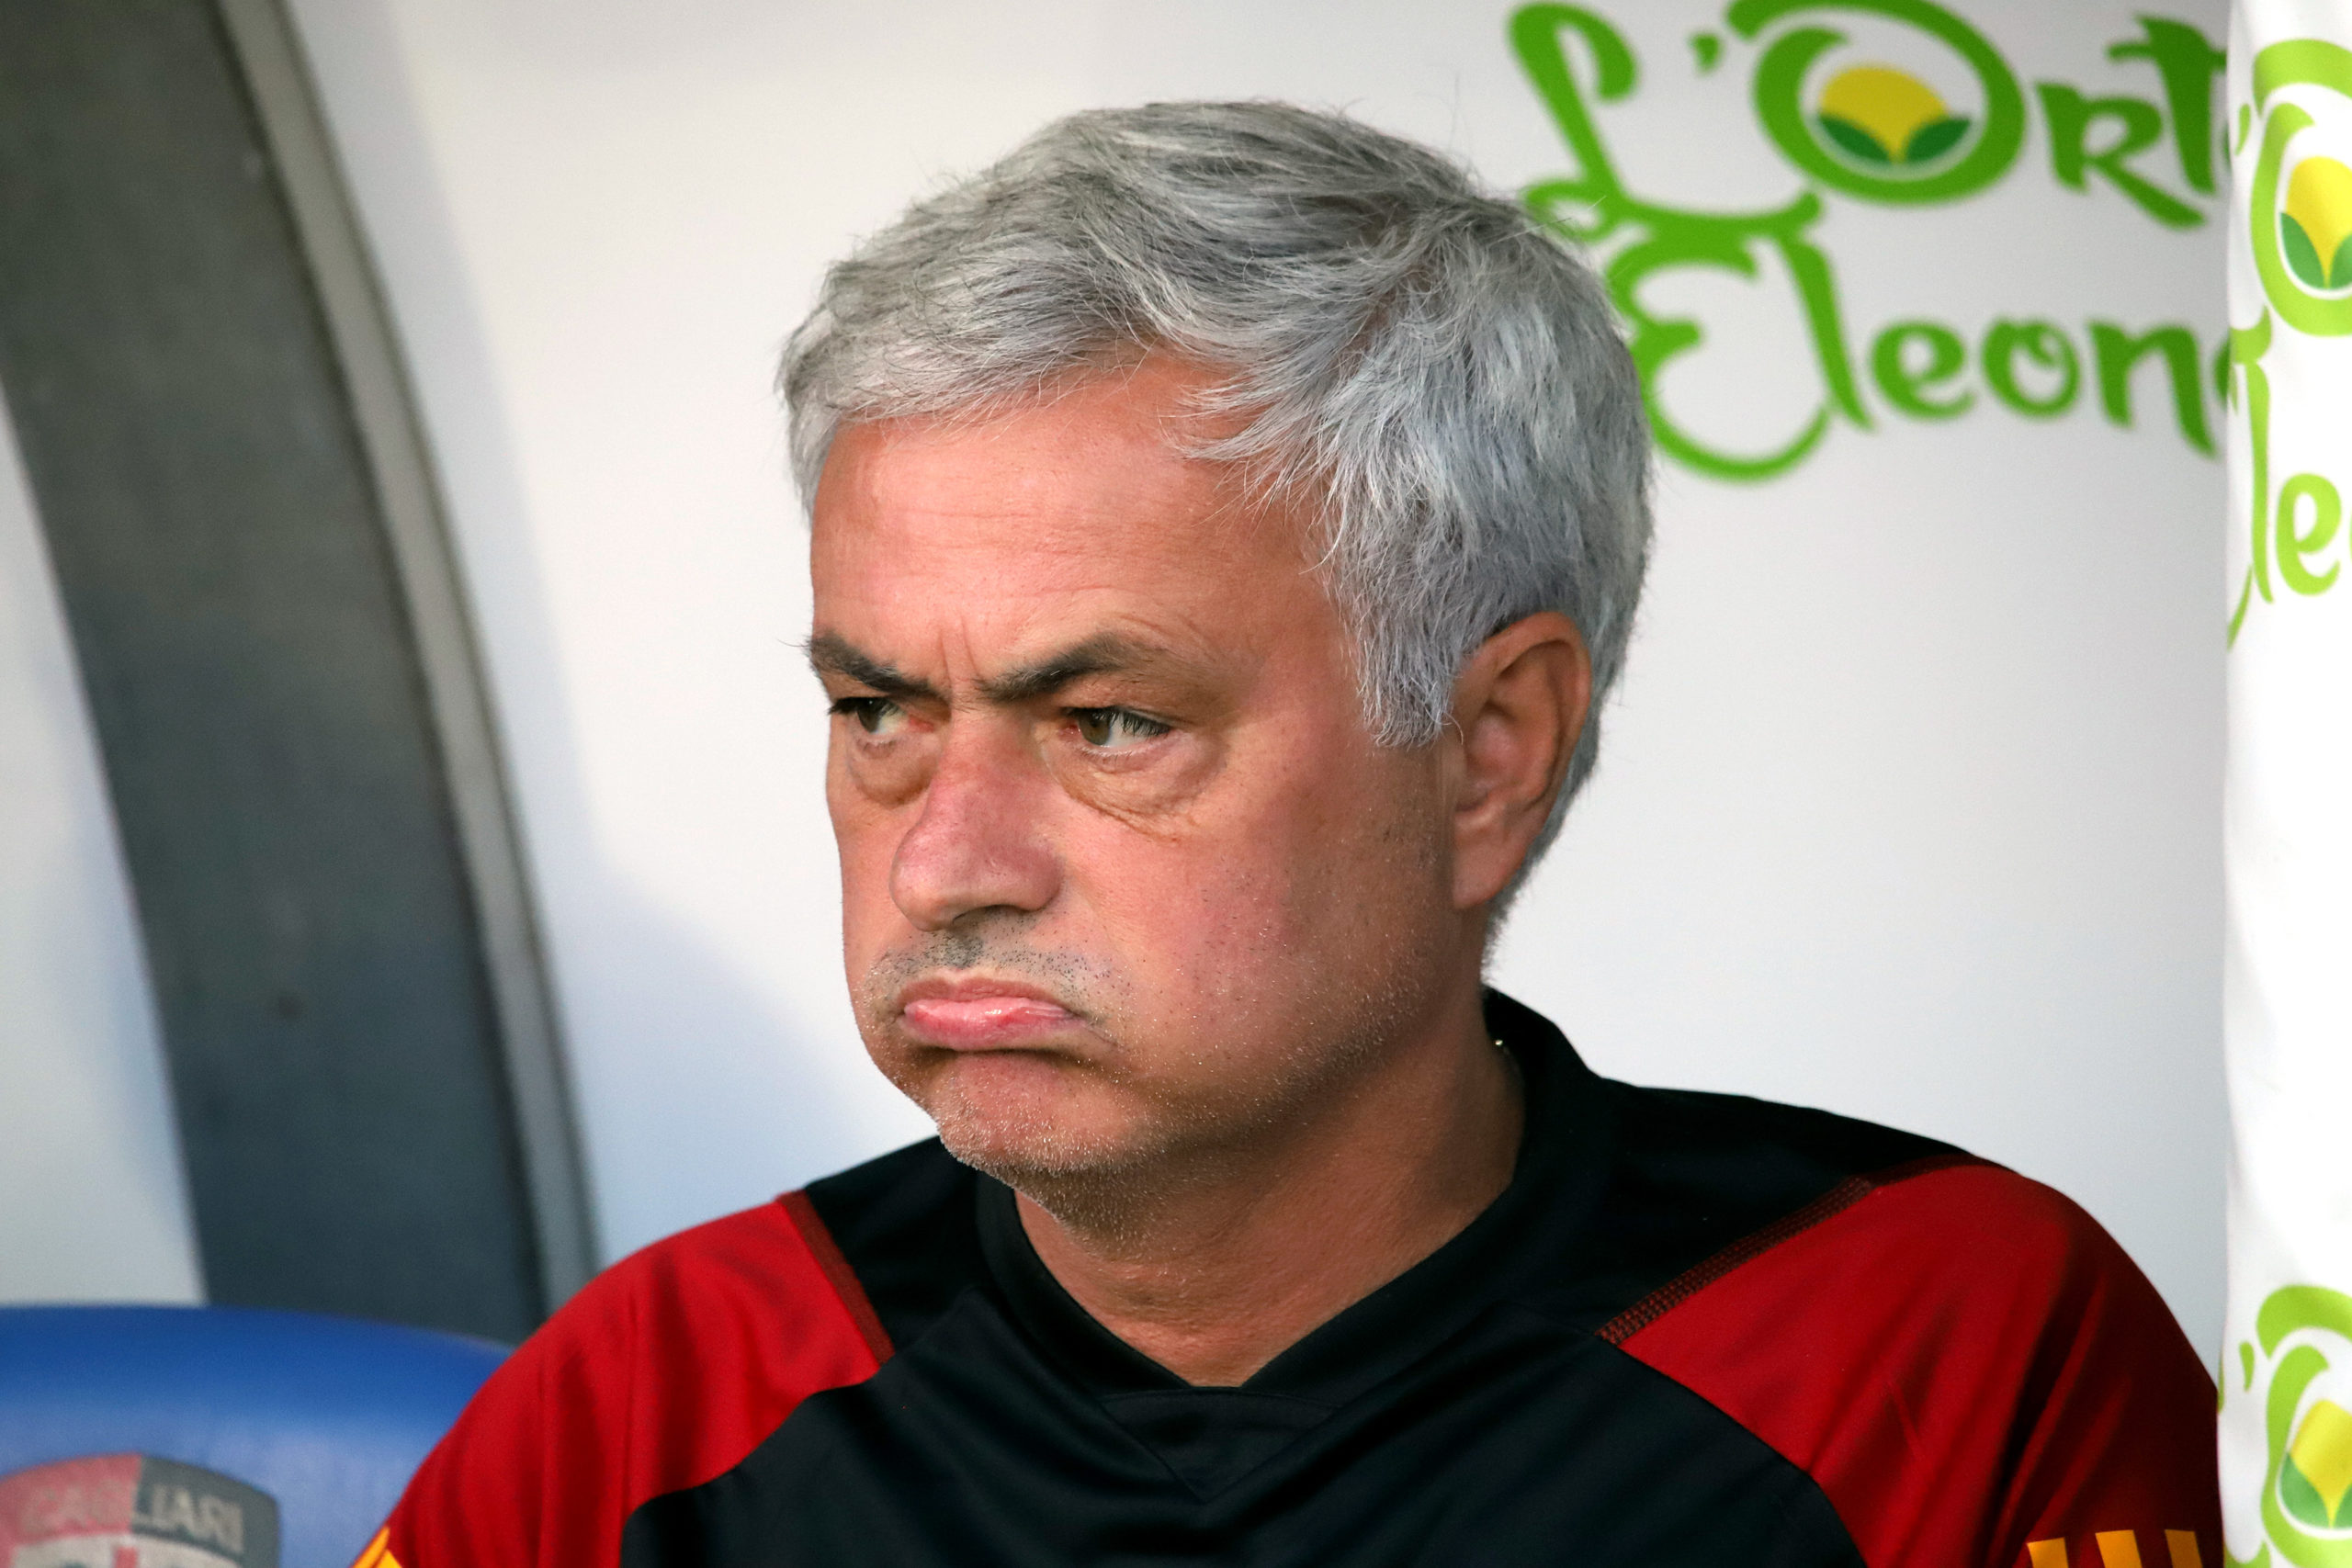 Roma slumped to a 2-0 defeat at the hands of Slavia Praha at the Fortuna Arena in Preague, and Jose Mourinho was nothing less than furious after the game.